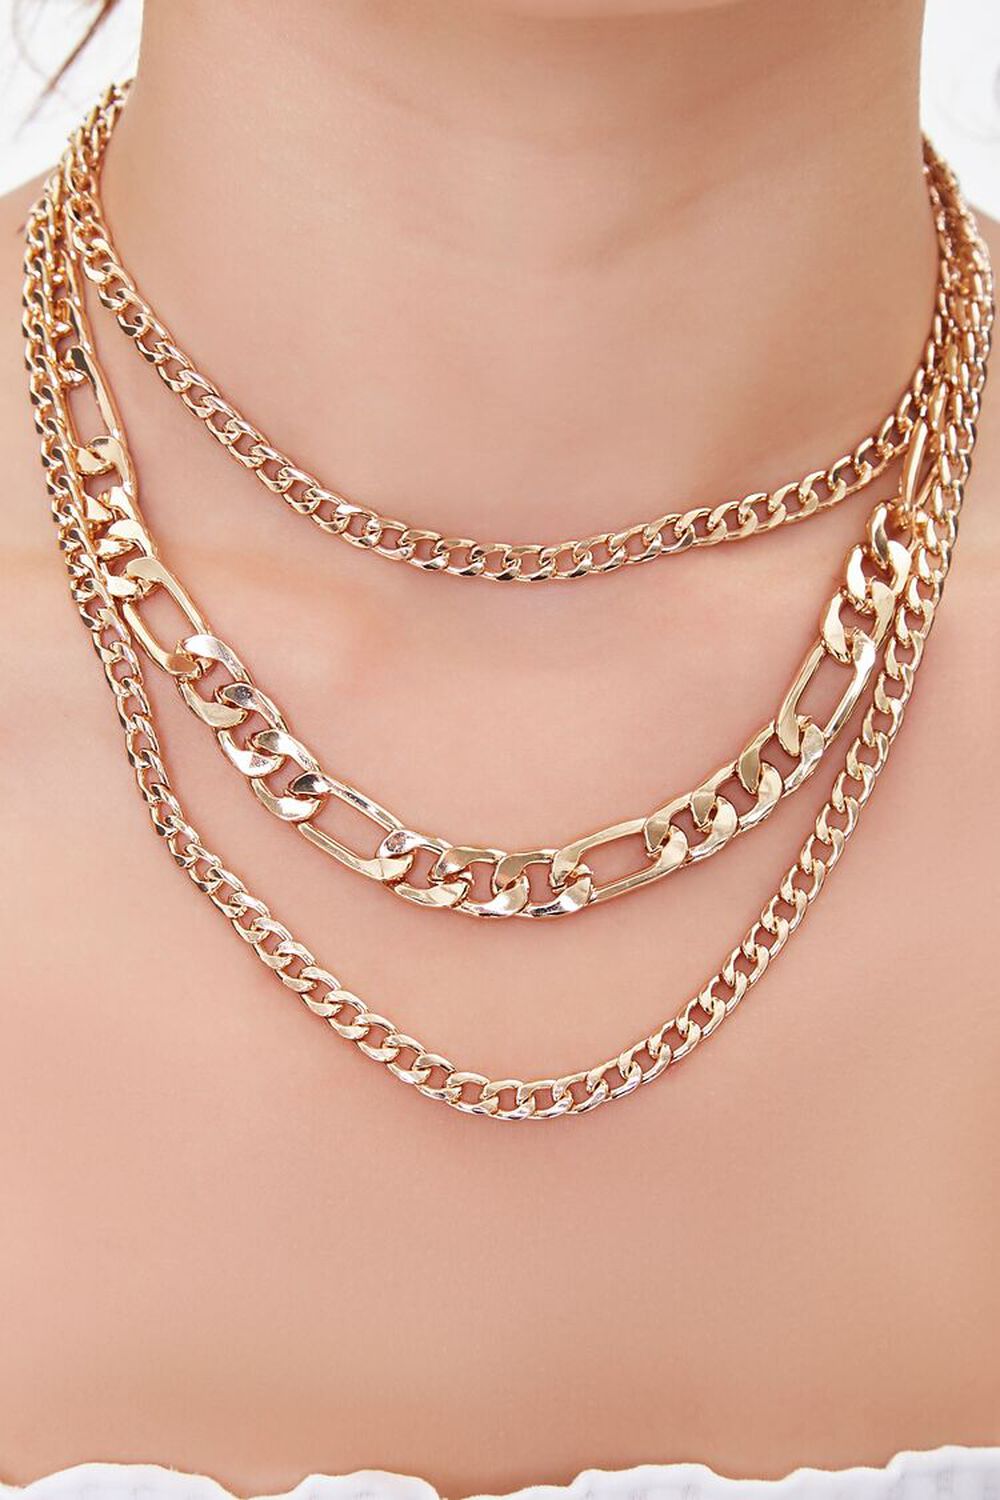 Chunky Layered Chain Necklace, image 1